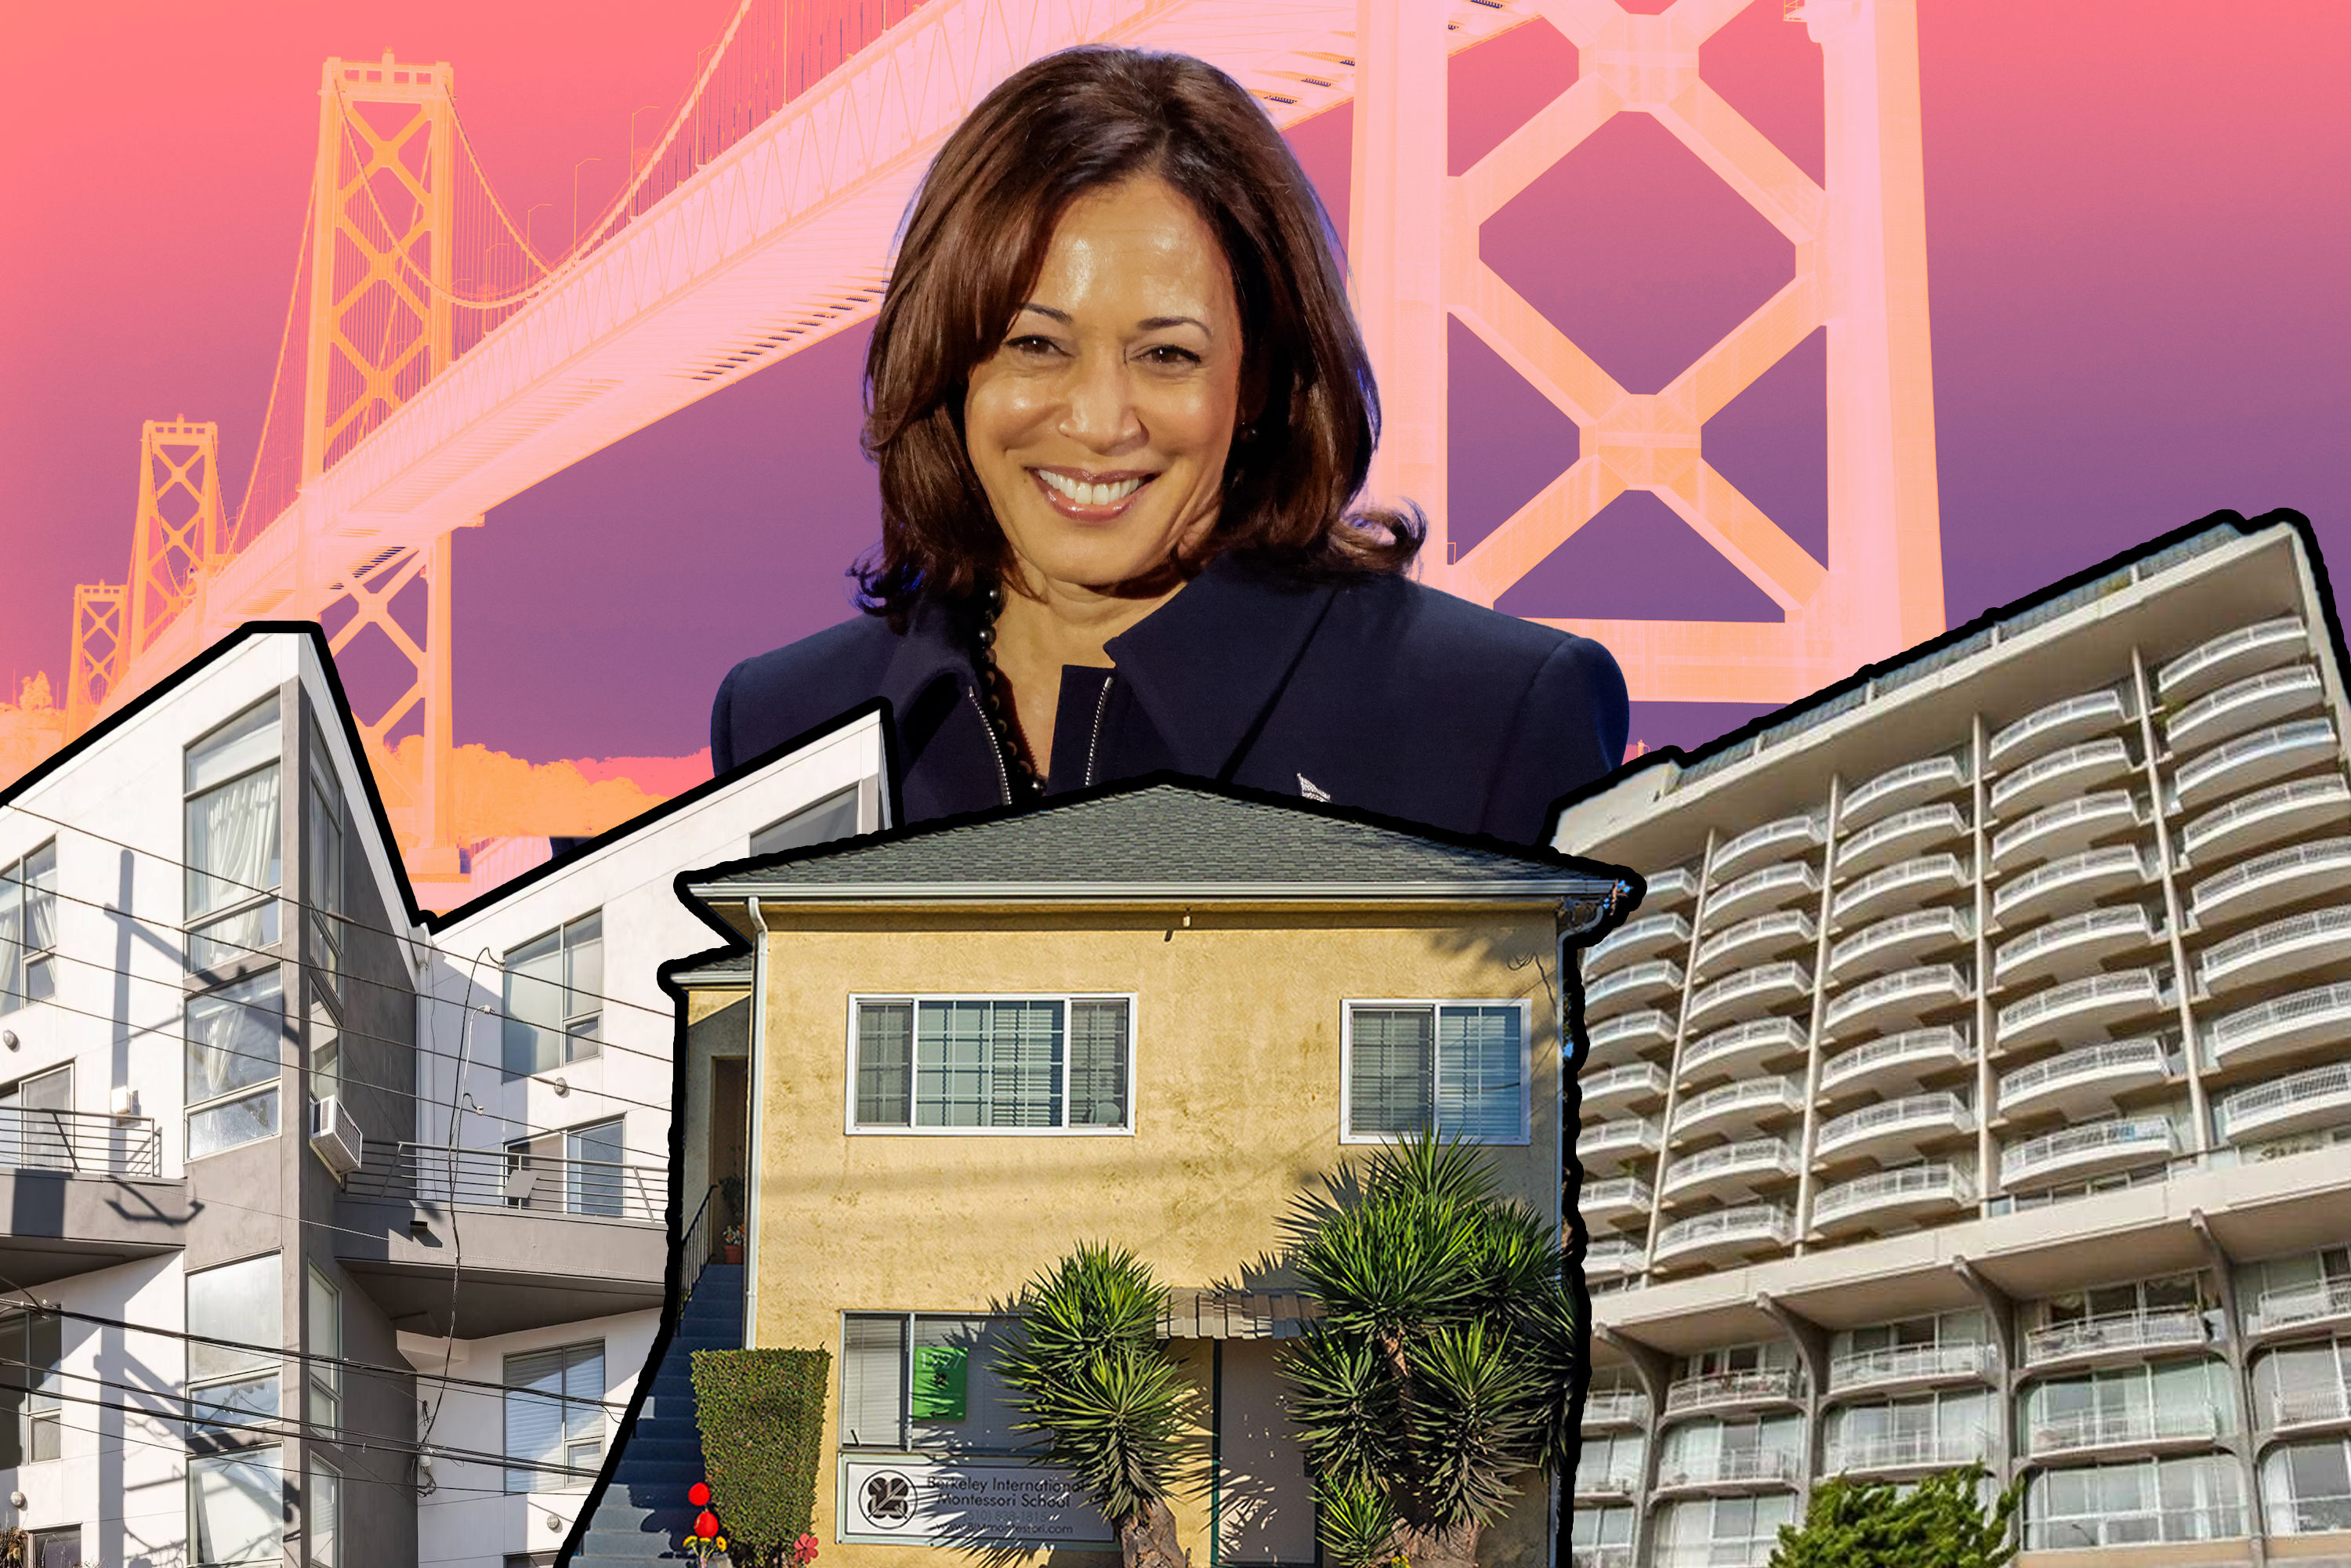 The image features a smiling woman in front of the Bay Bridge with three different apartment buildings in the foreground, each showcasing distinct architectural styles.